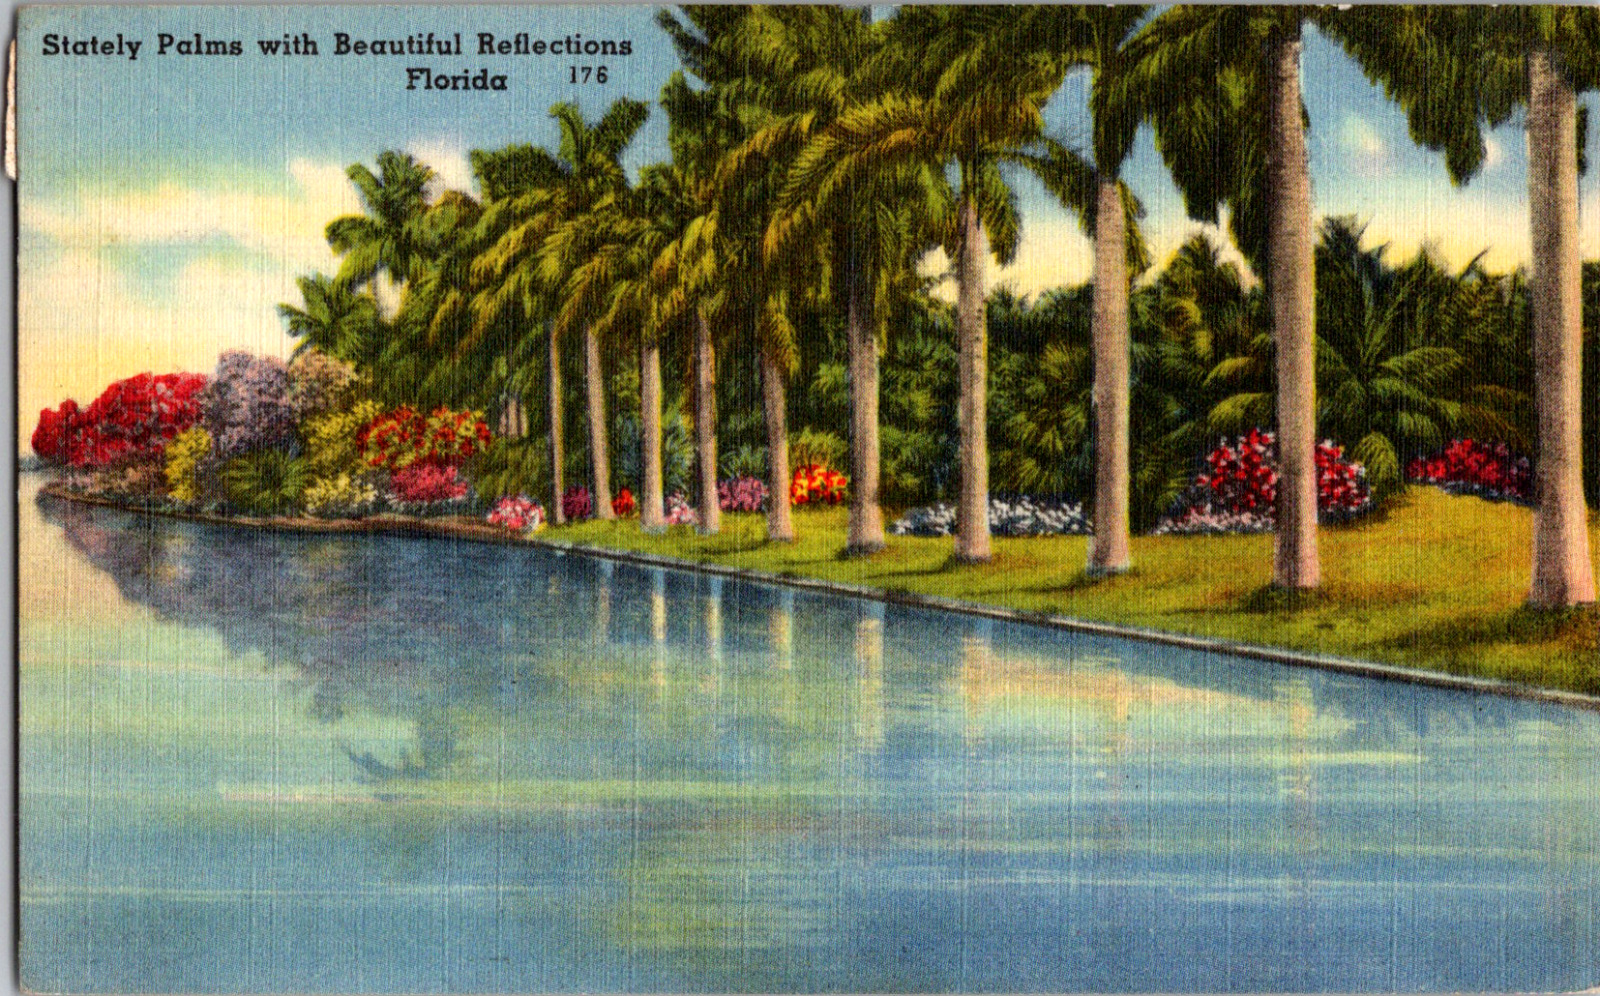 Vintage 1940s Stately Palms Reflecting in Mirror Like Waters Florida FL Postcard